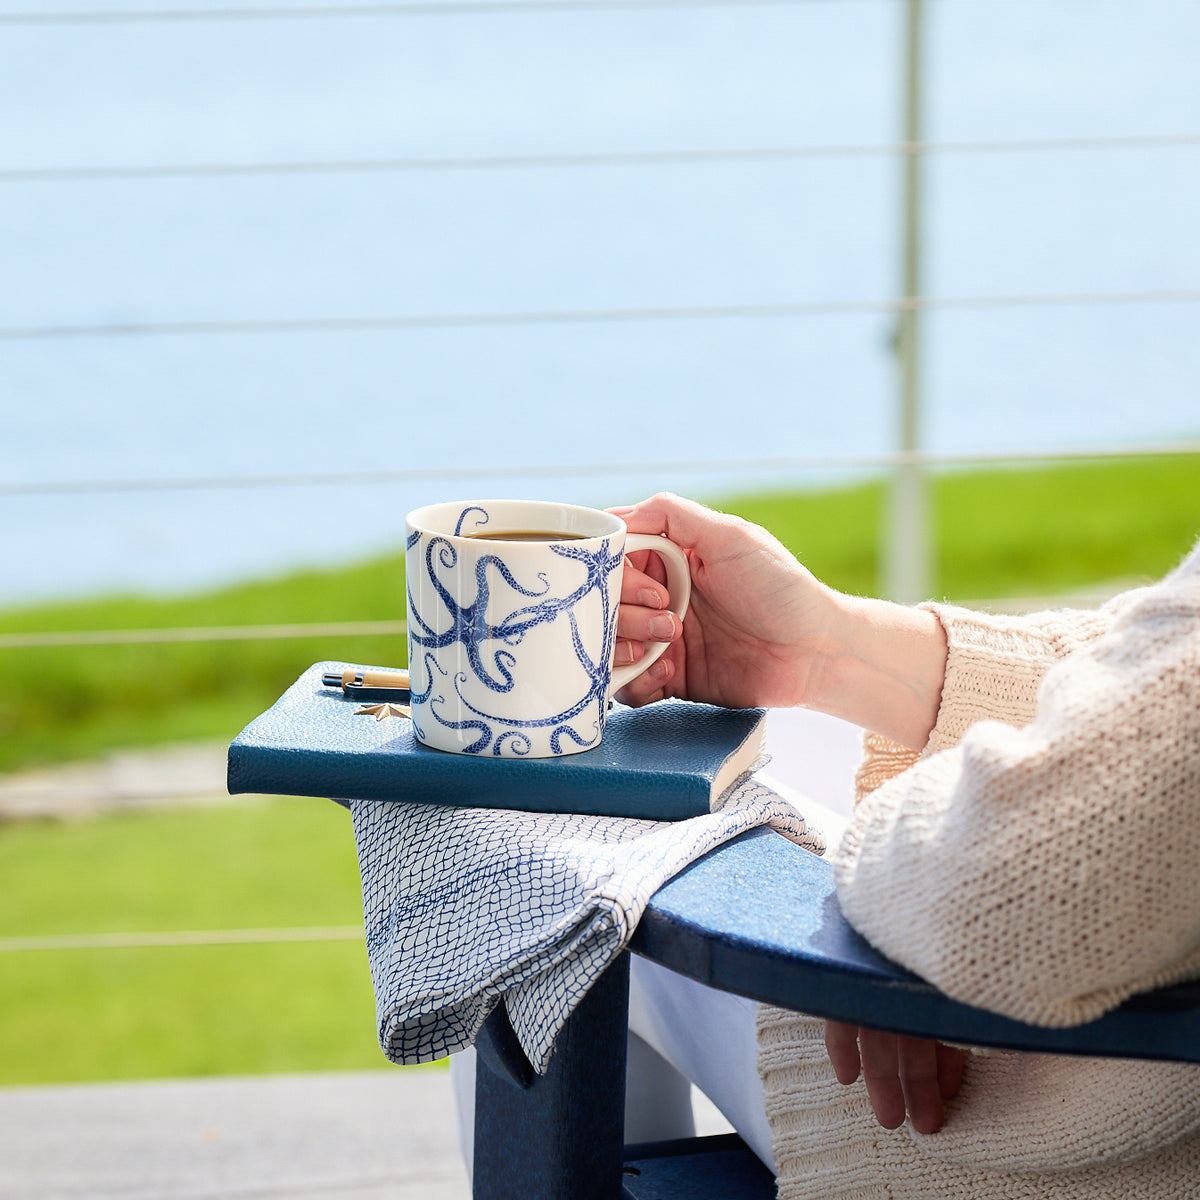 A person holds a high-fired porcelain mug with an octopus design, resting on a chair outside with a body of water and greenery in the background. A notebook and pen sit on the armrest. The Starfish Mug by Caskata Artisanal Home is dishwasher and microwave safe, perfect for enjoying coffee amid nature&#39;s tranquility.